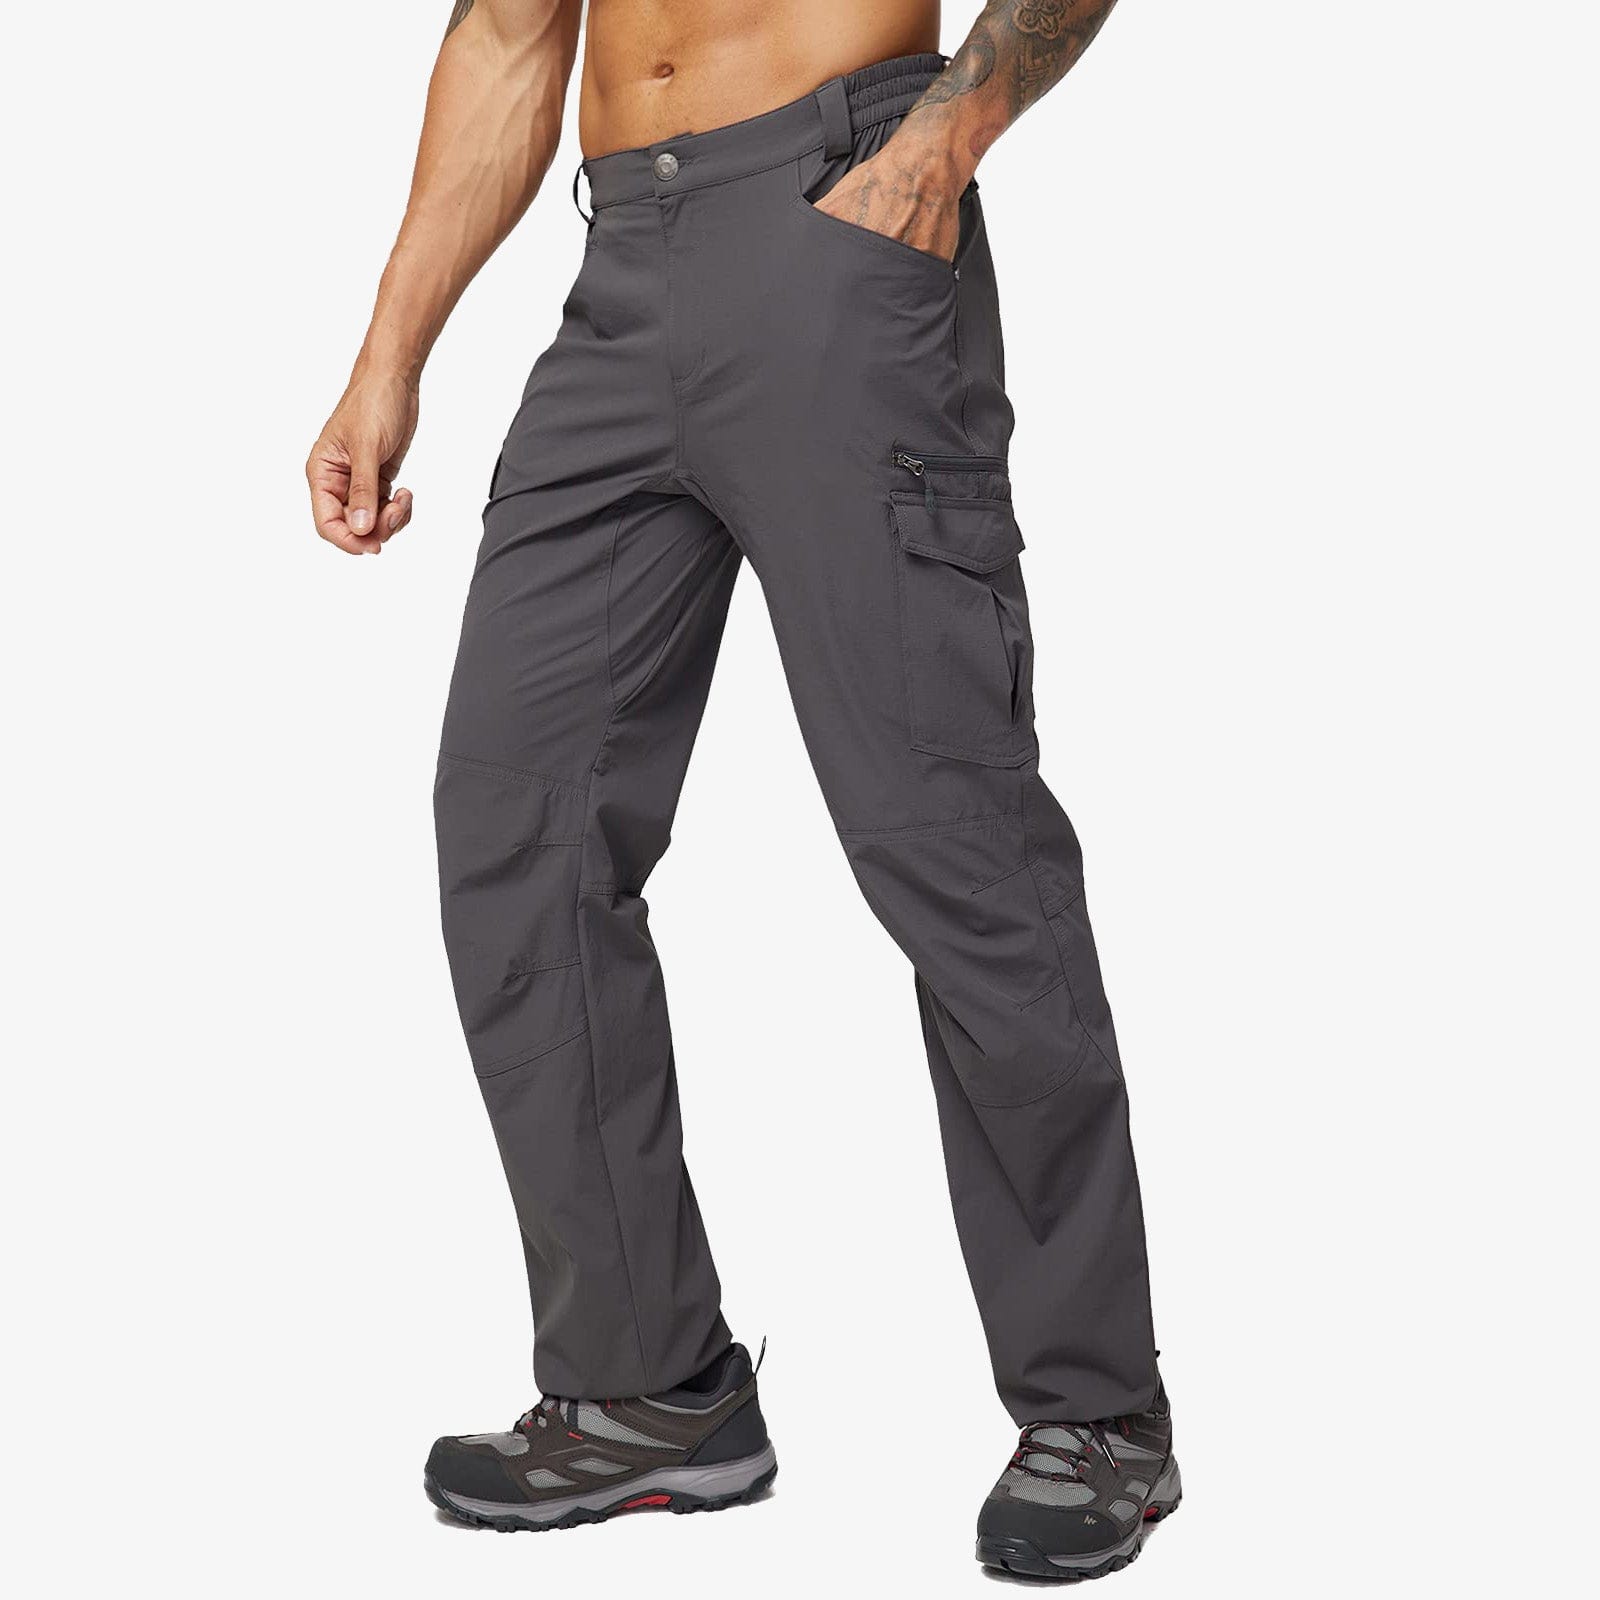 Pants with Built-In Liners | birddogs